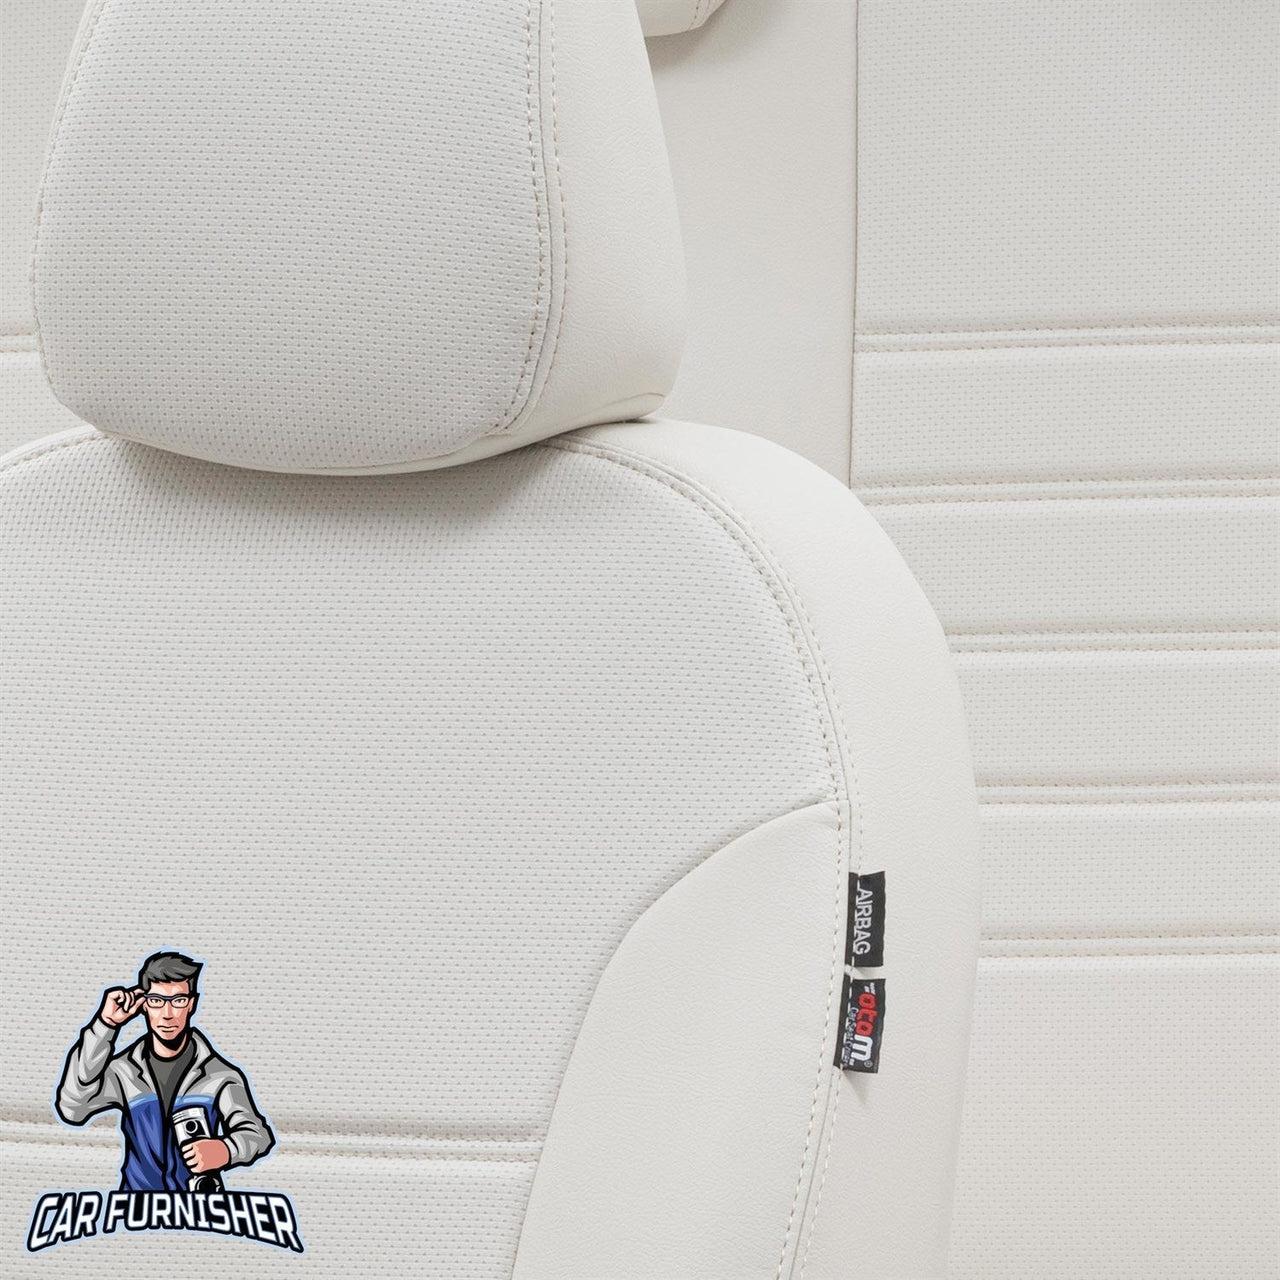 Cupra Formentor Seat Covers New York Leather Design Ivory Leather